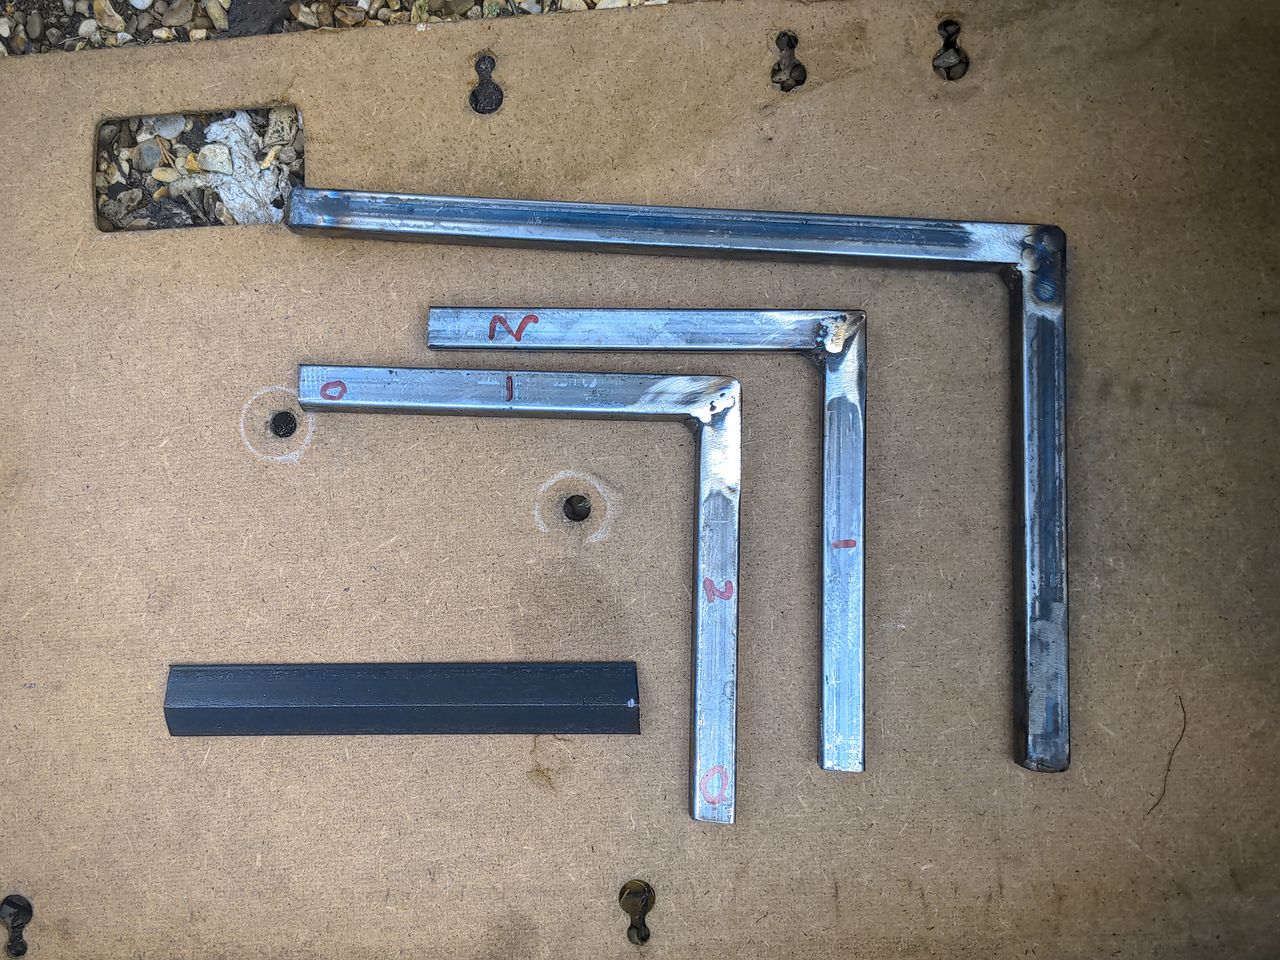 Three pieces of steel: box section cut and welded into right-angles and a small length of angle iron